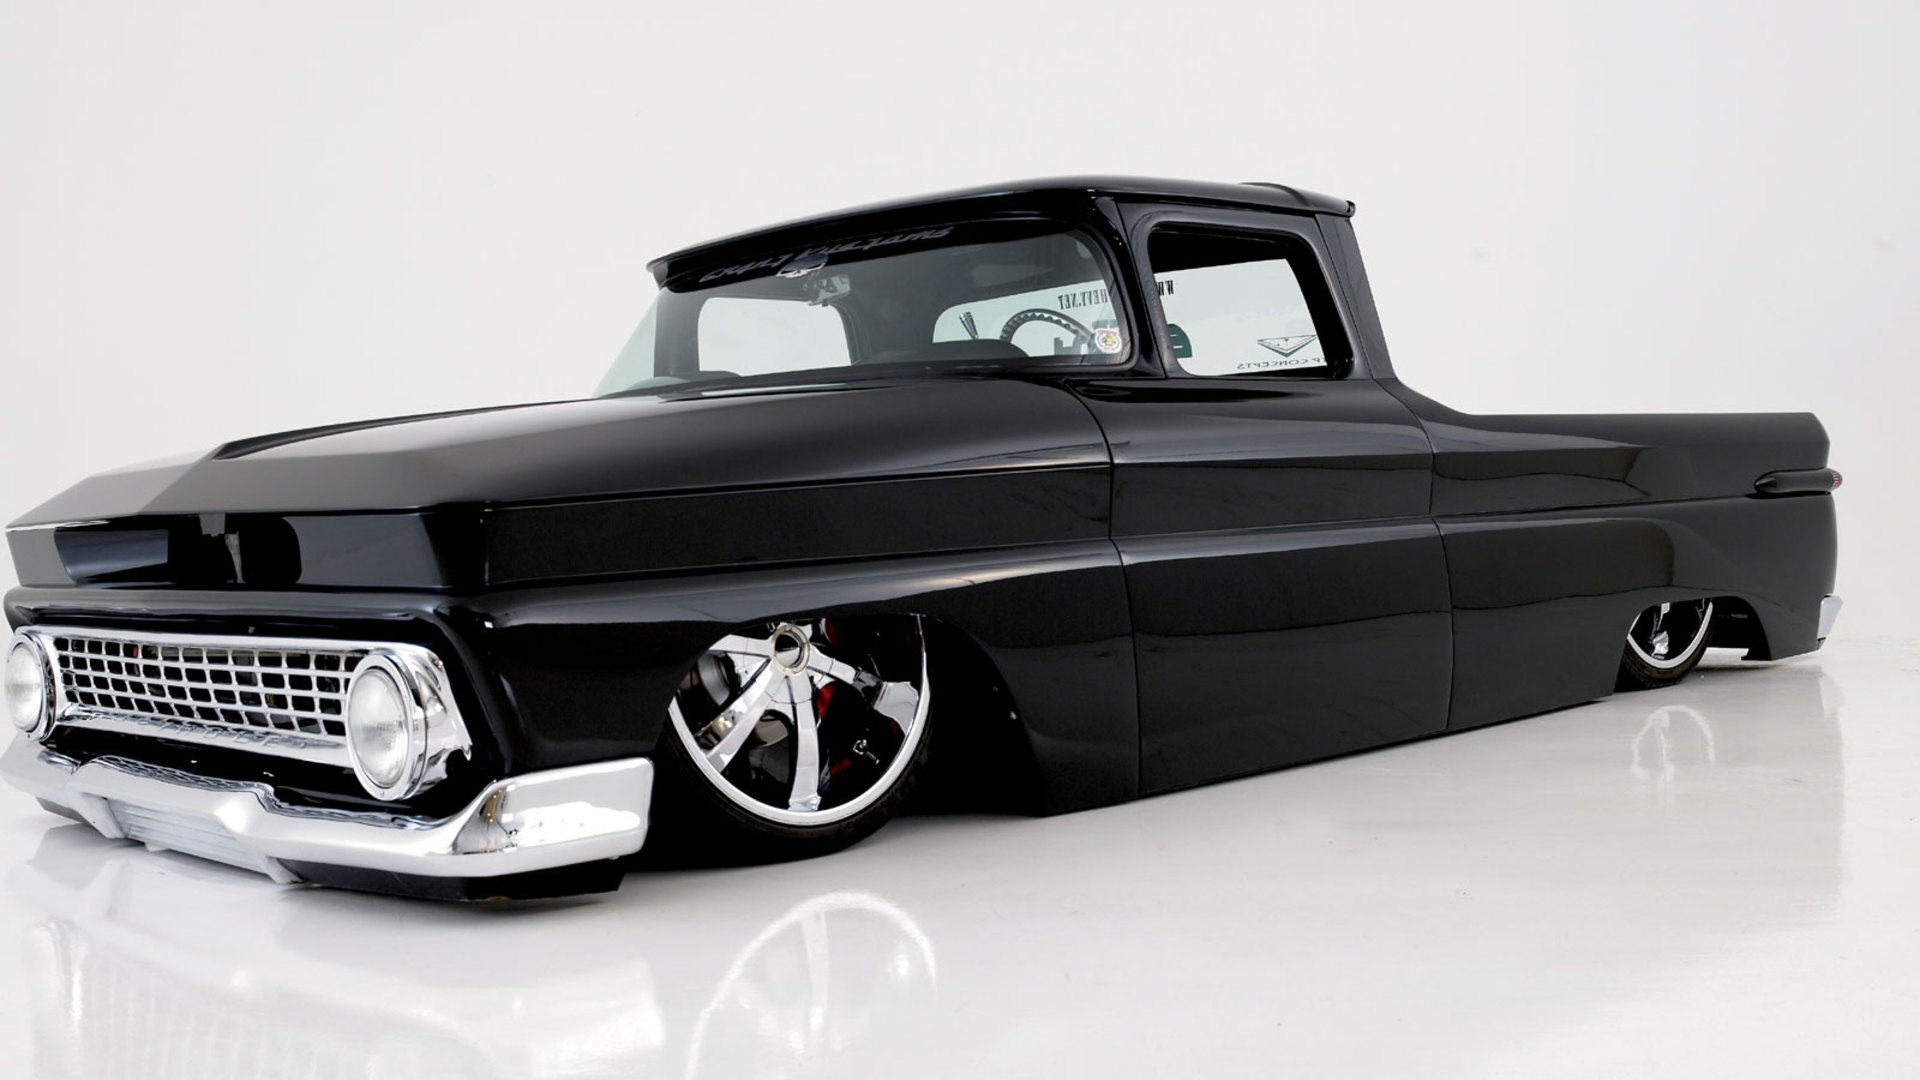 Lowrider Trucks Wallpaper Related Keywords Amp Suggestions